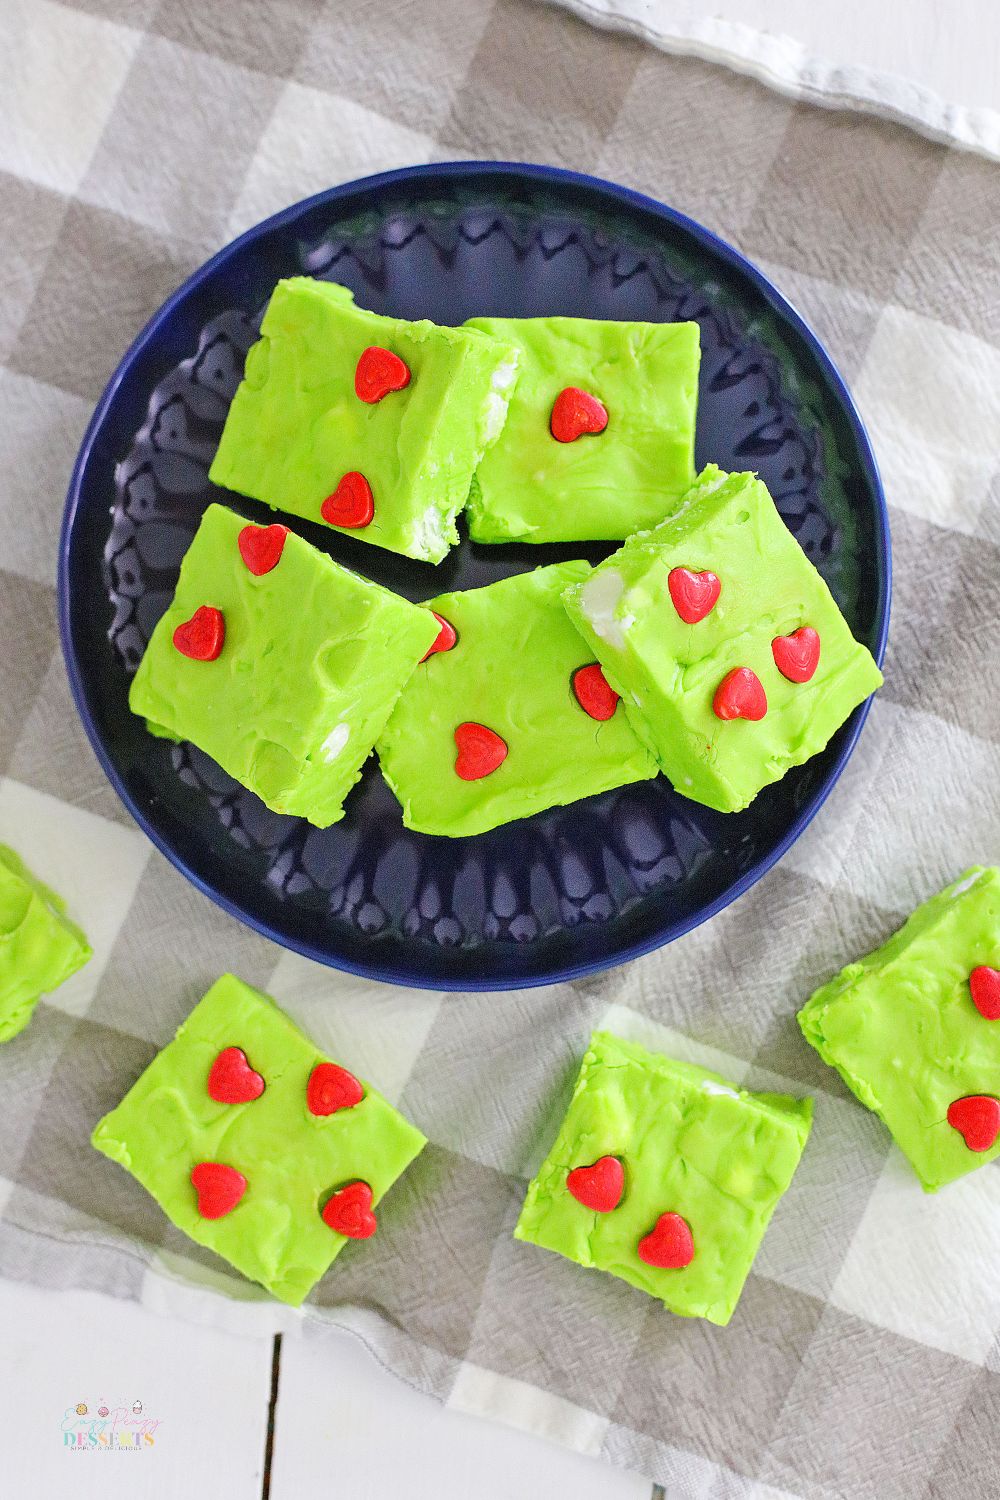 Image of Christmas fudge in green color, decorated with red hearts and white marshmallows